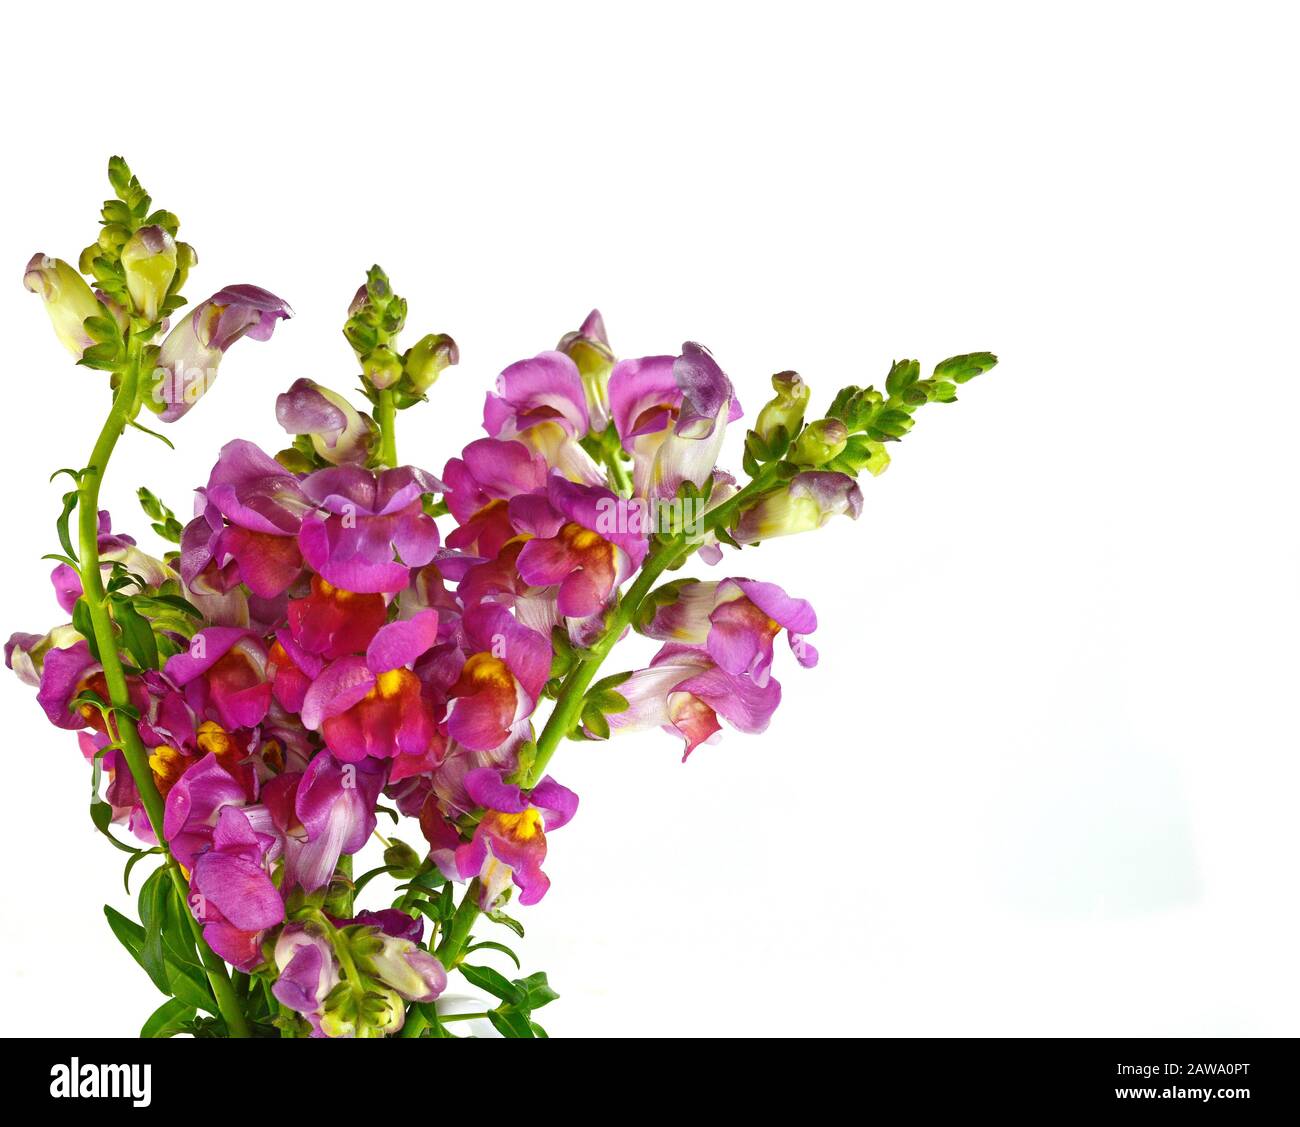 Close-up of yellow, pink and orange flowers of snapdragon (Antirrhinum majus) isolated against a white background Stock Photo